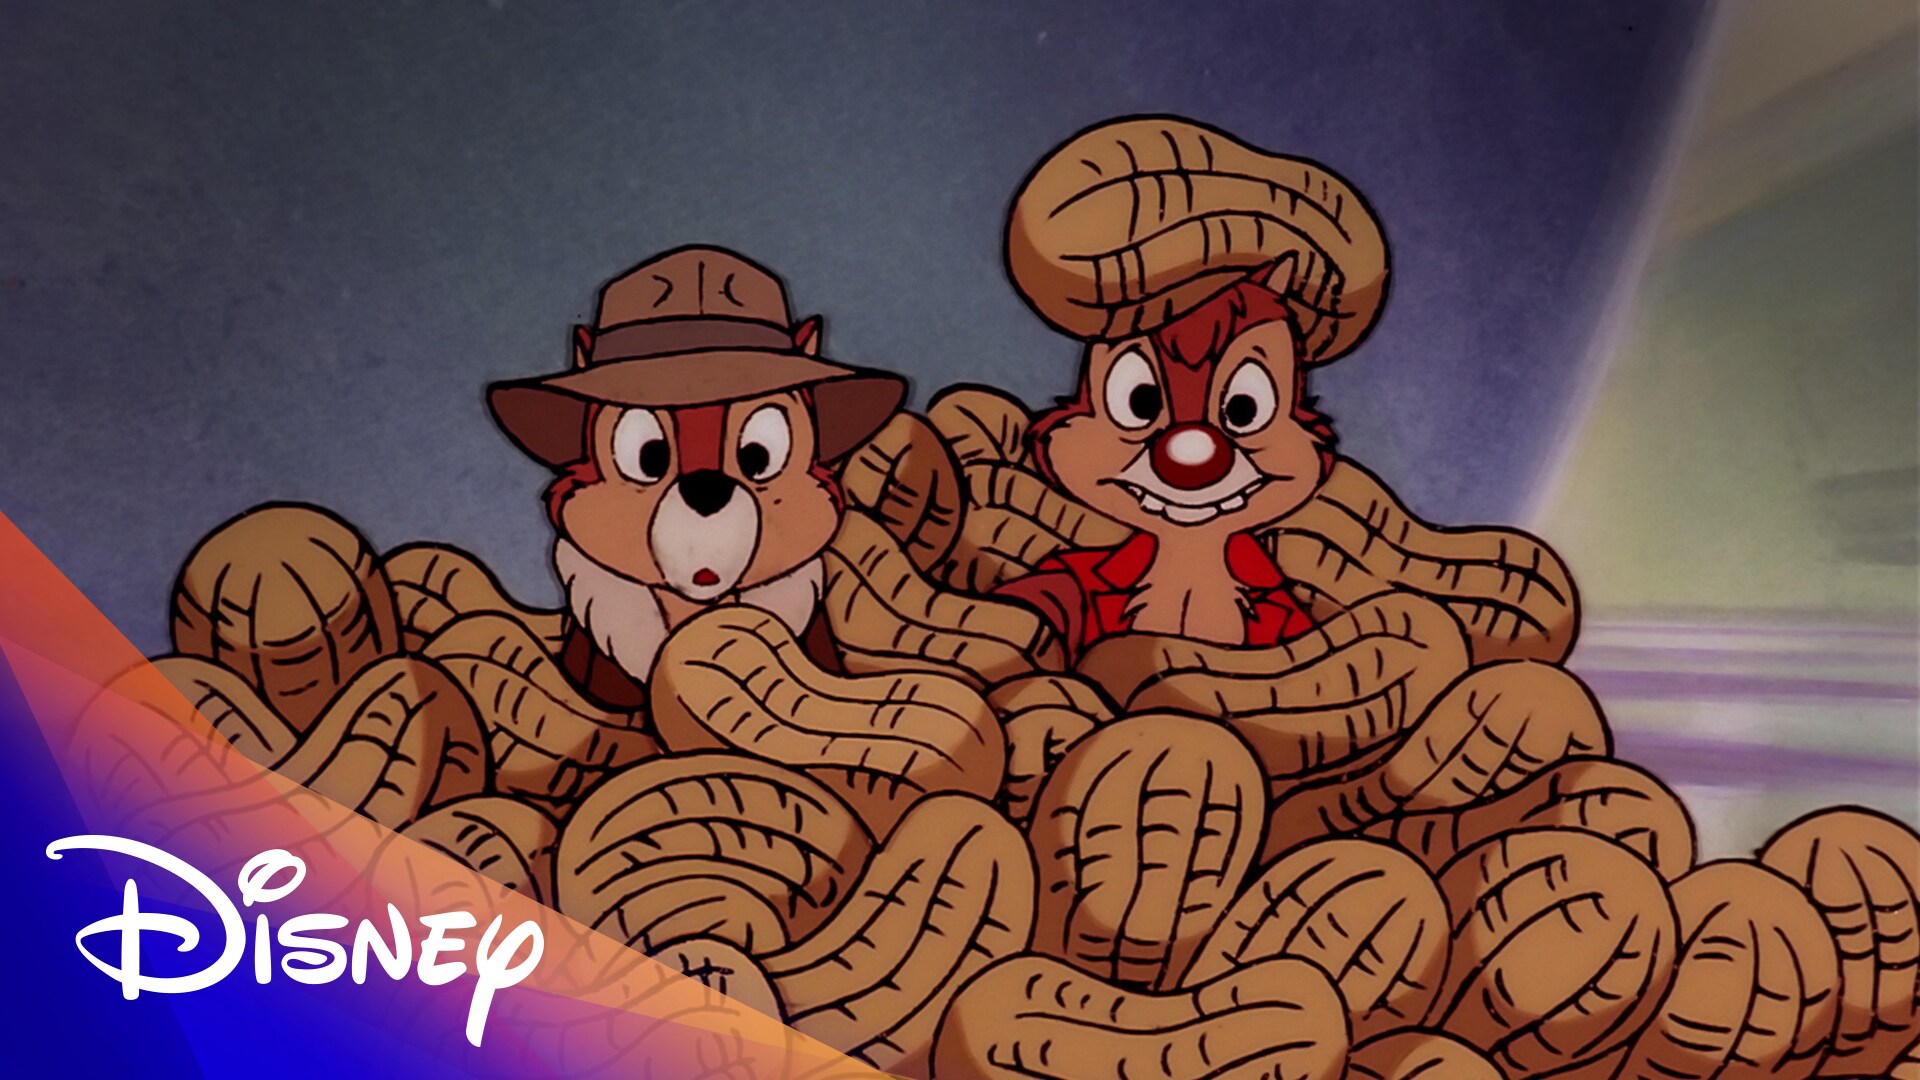 Chip 'n Dale Rescue Rangers Theme Song | Disney